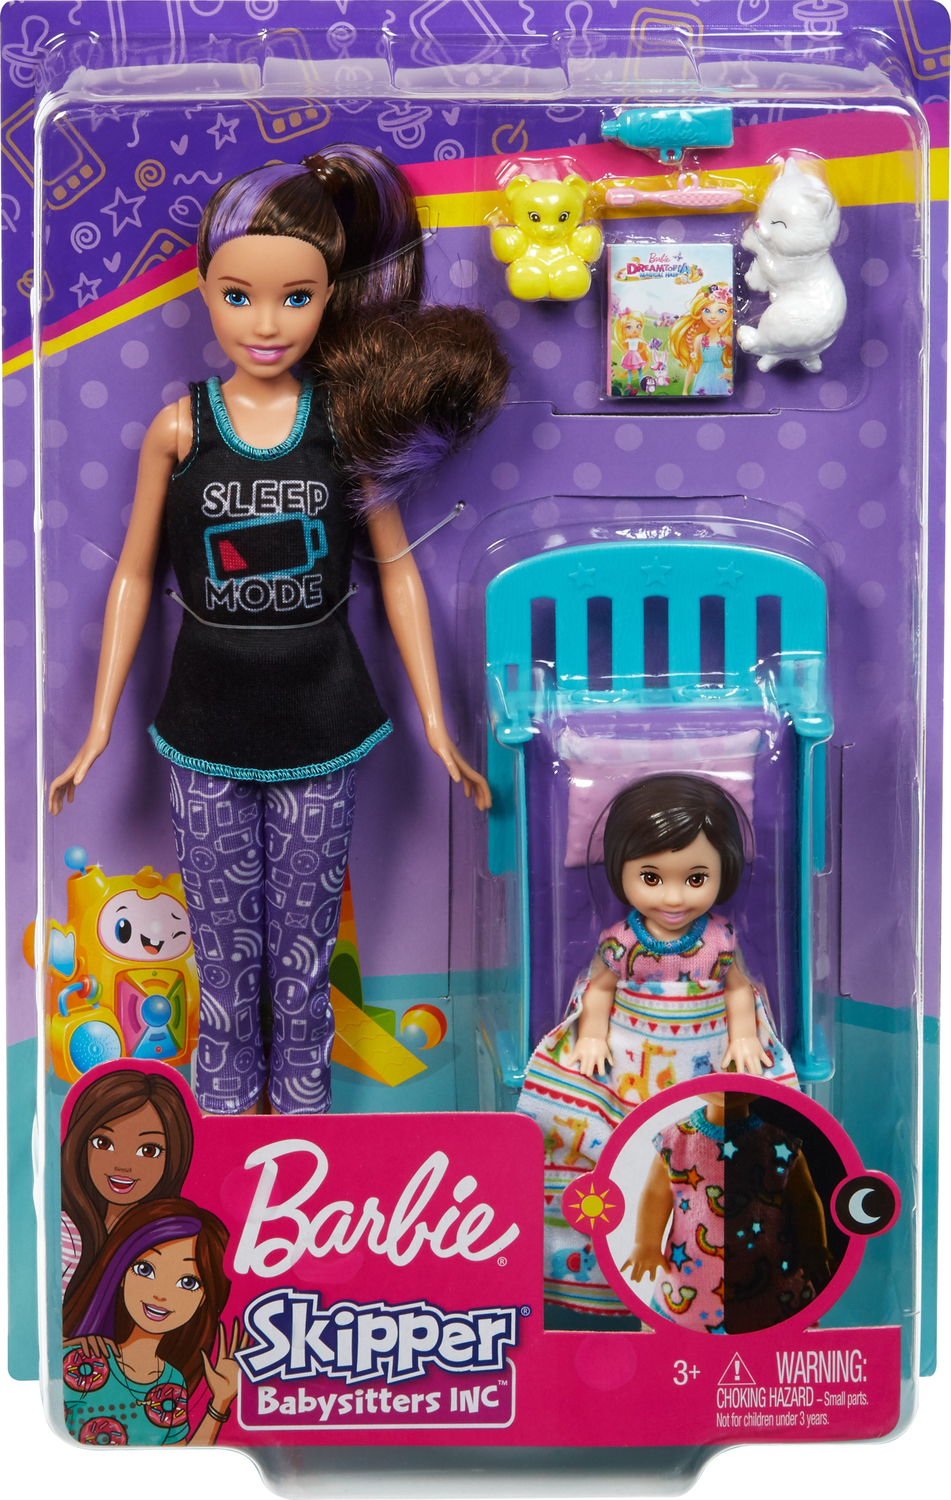 Barbie Skipper Inc. Skipper Babysitters Inc Doll And Accessories - The Toy Box Hanover